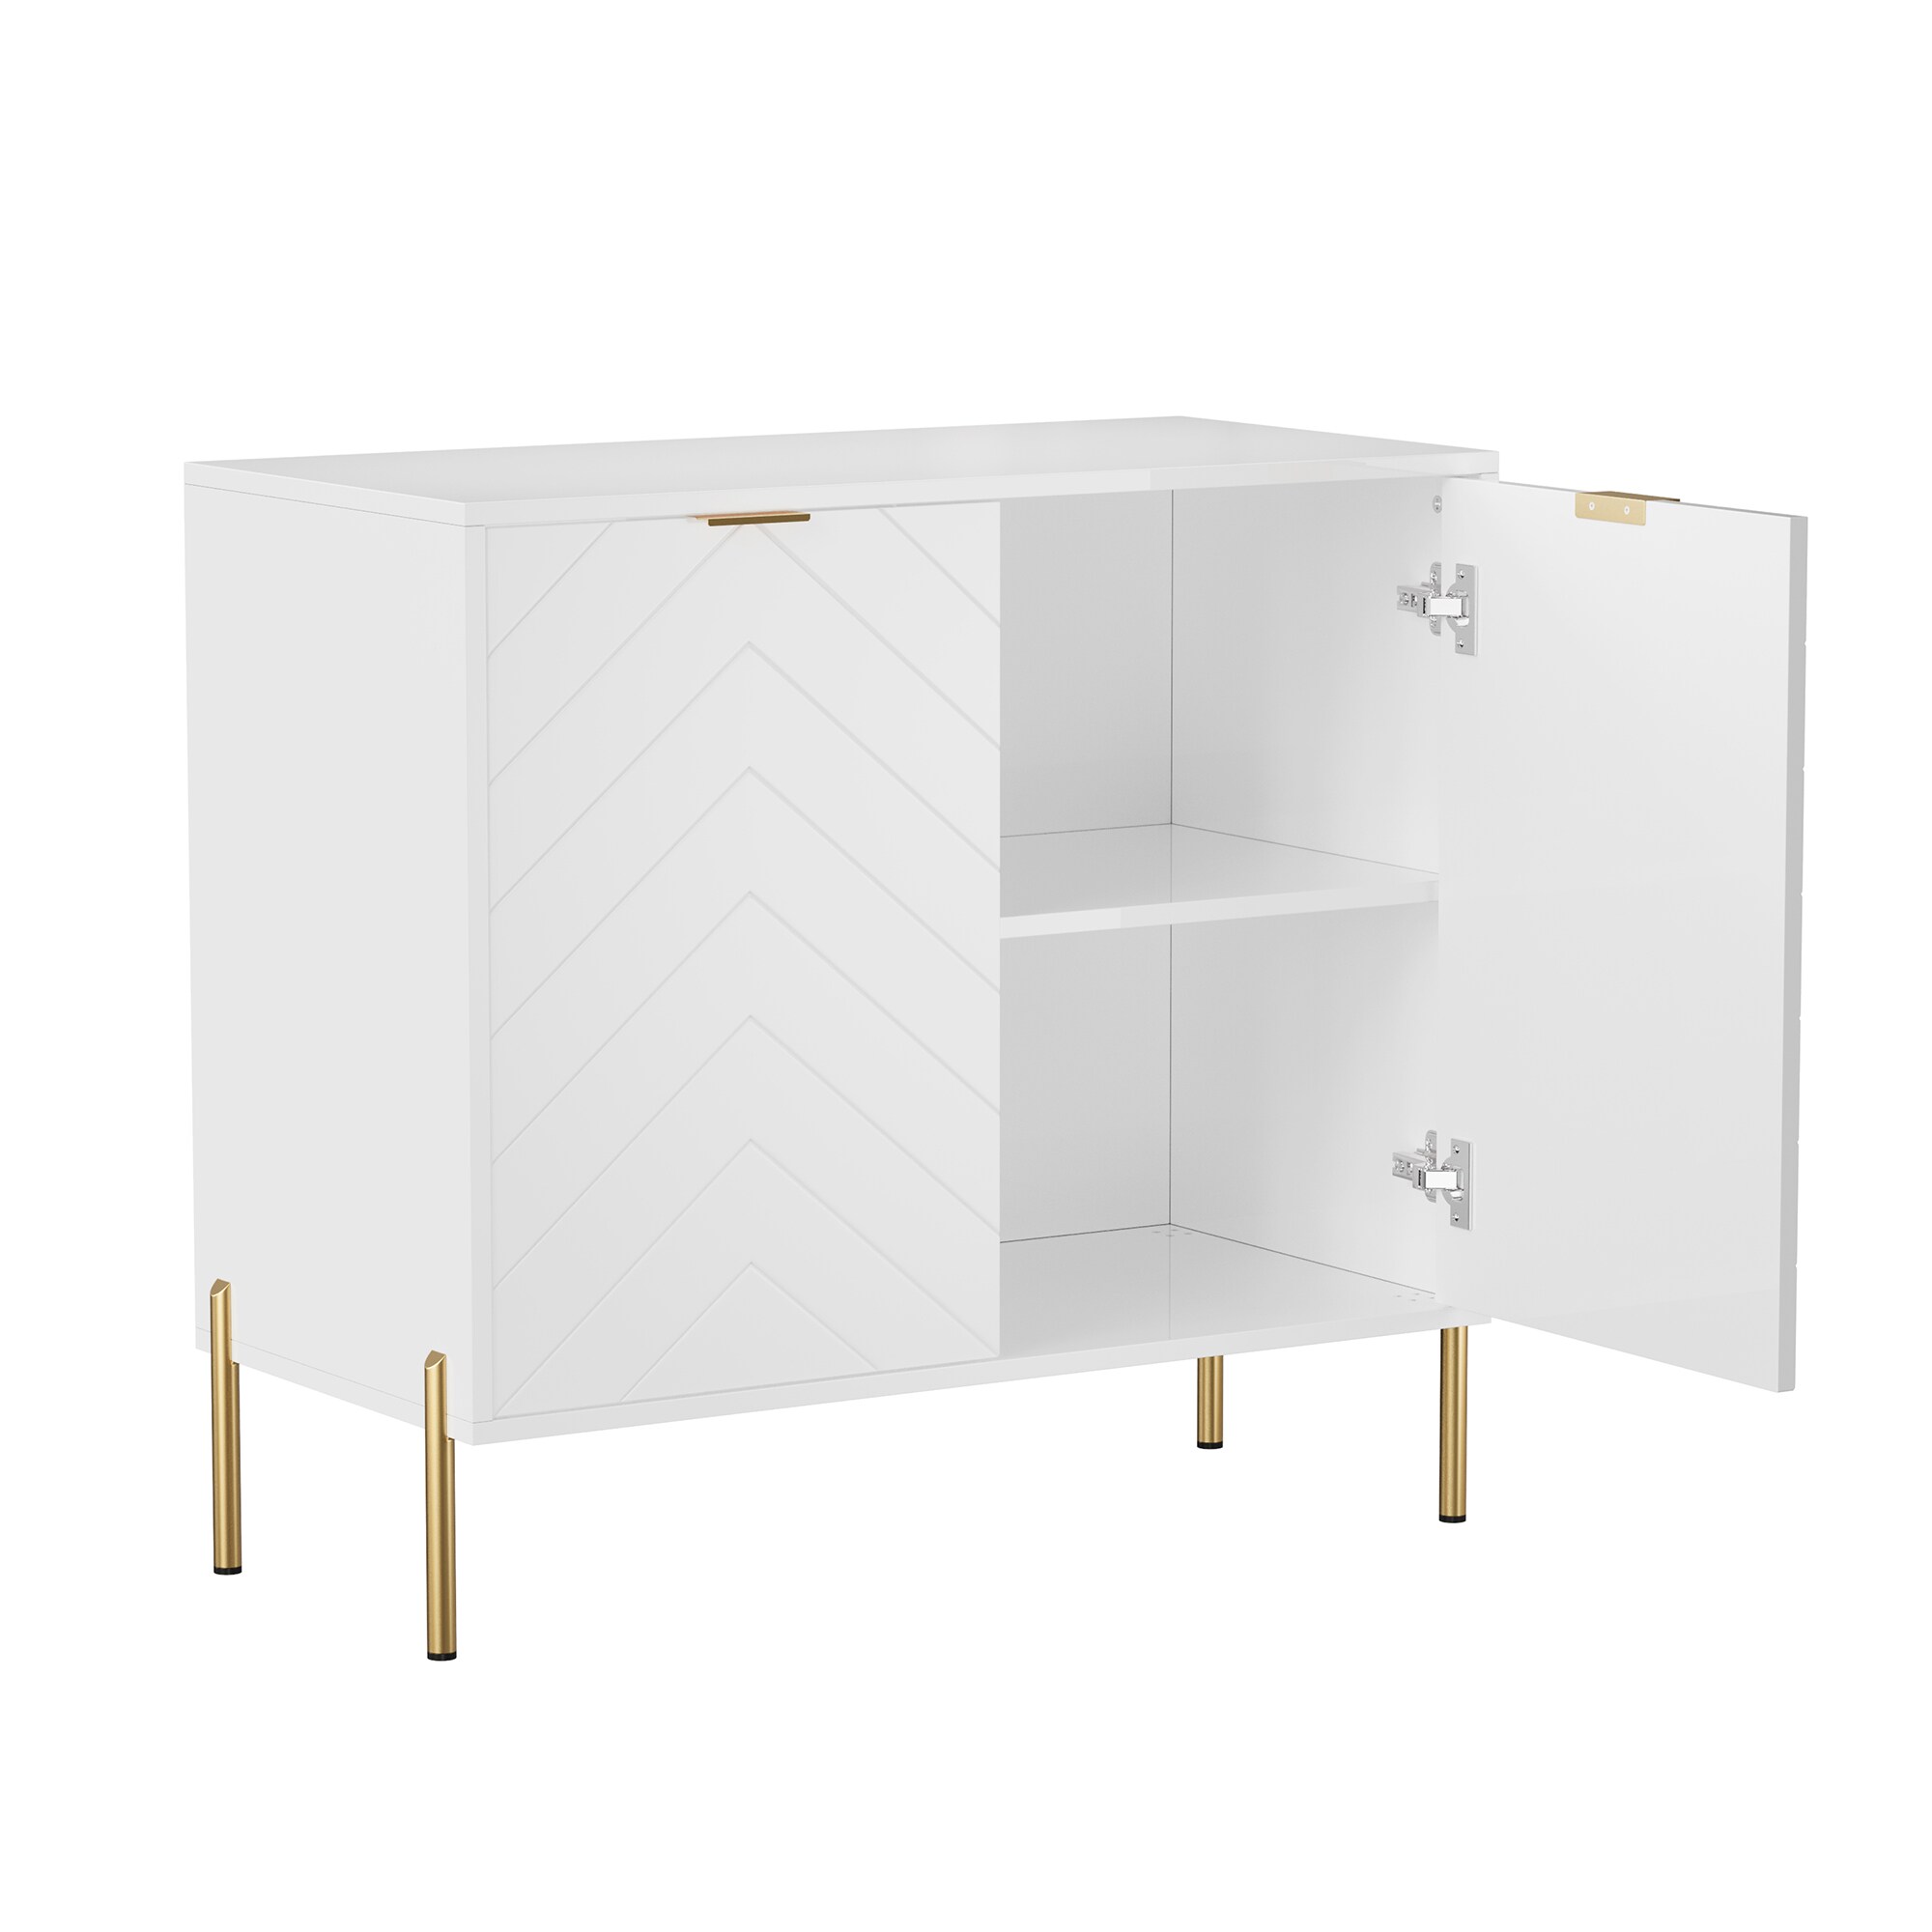 Clihome Two-Door Cabinet White Accent Chest at Lowes.com